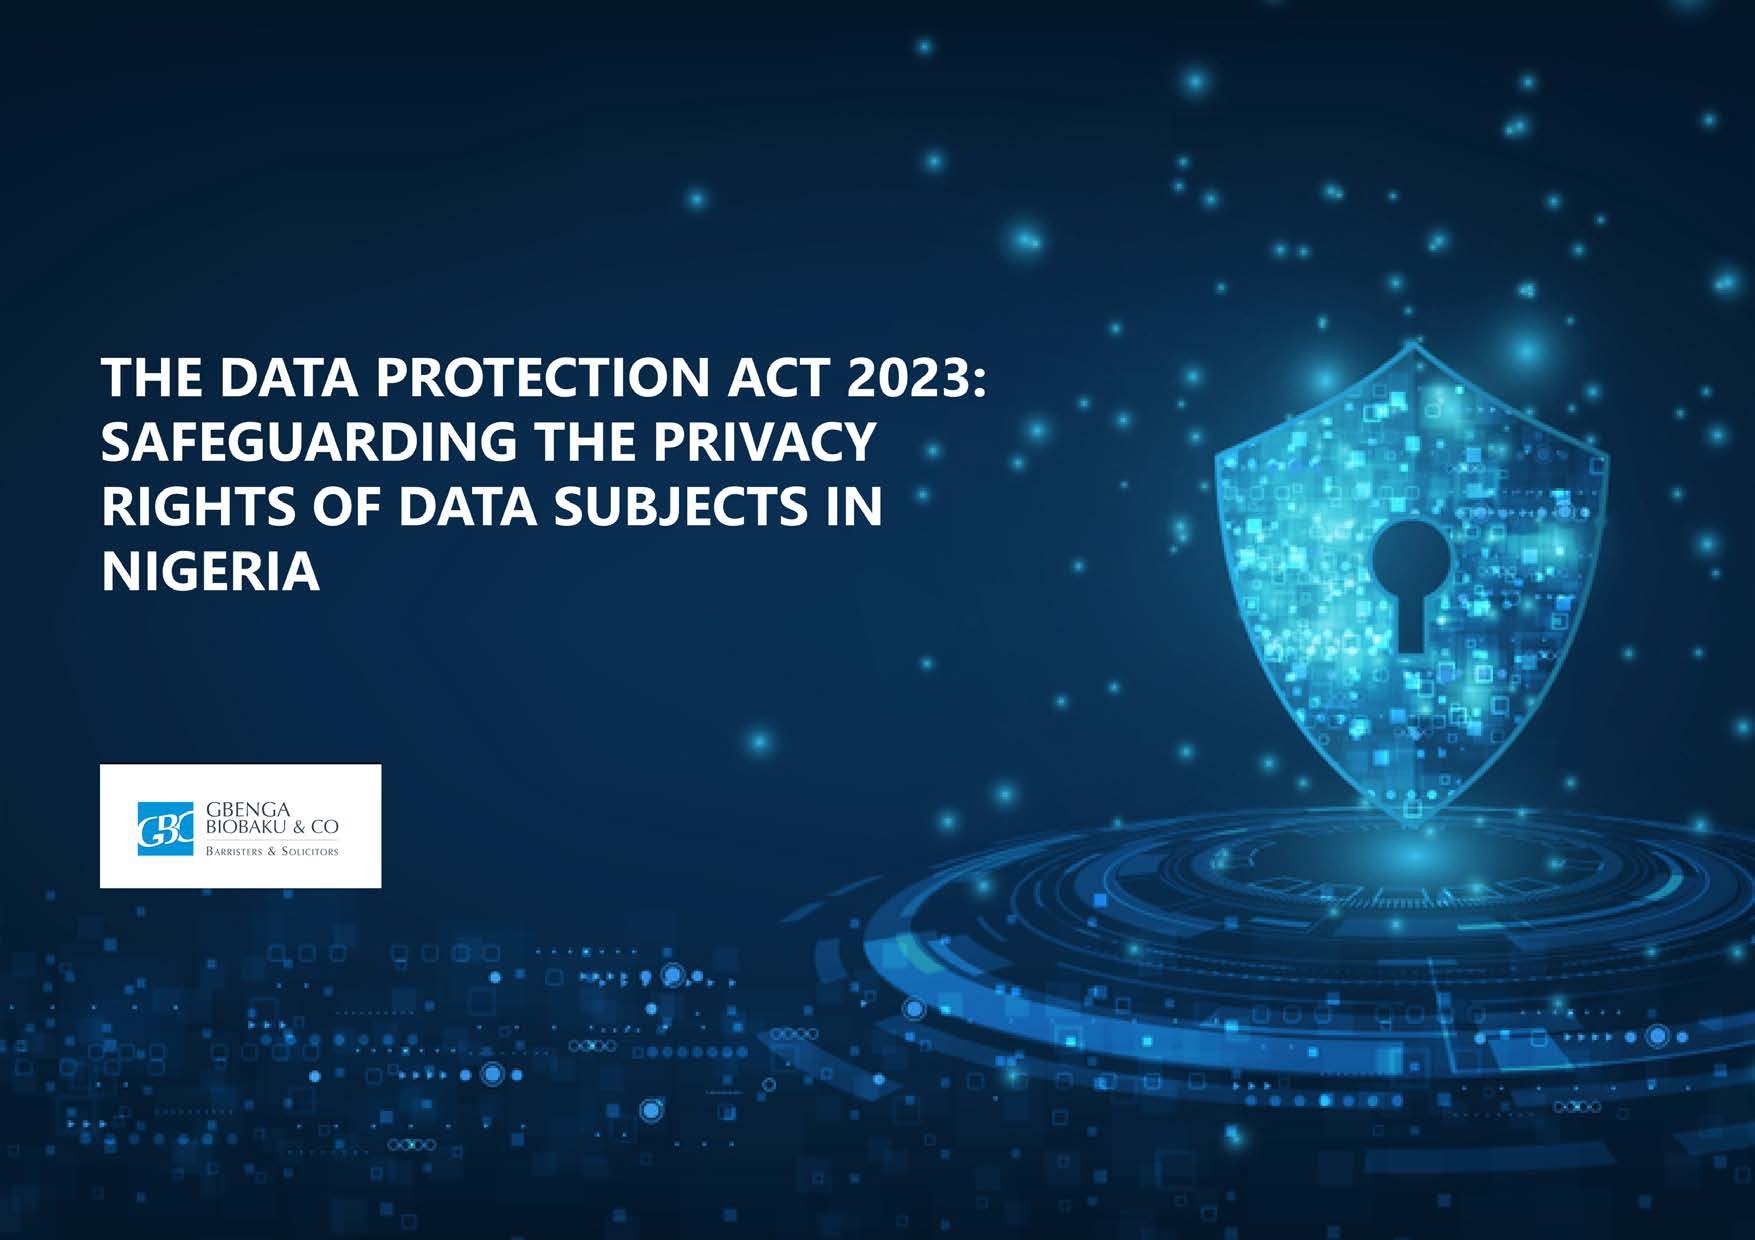 THE DATA PROTECTION ACT 2023: SAFEGUARDING THE PRIVACY RIGHTS OF DATA SUBJECTS IN NIGERIA